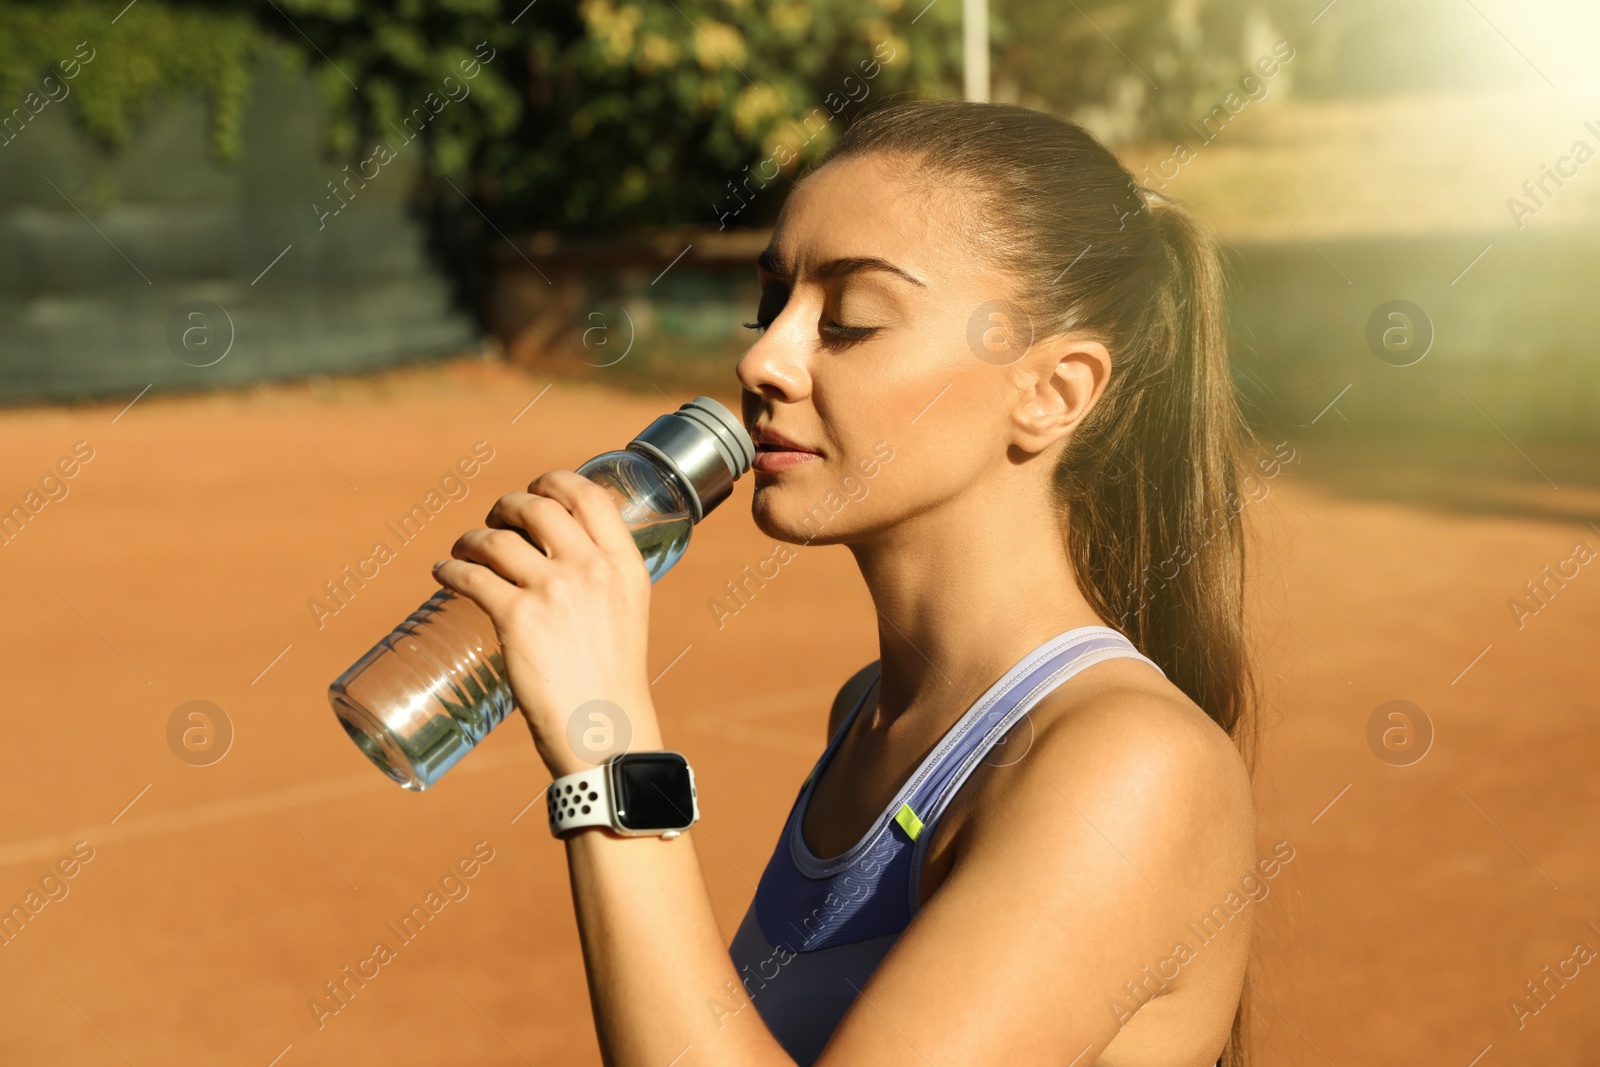 Photo of Woman with modern smart watch drinking water on tennis court